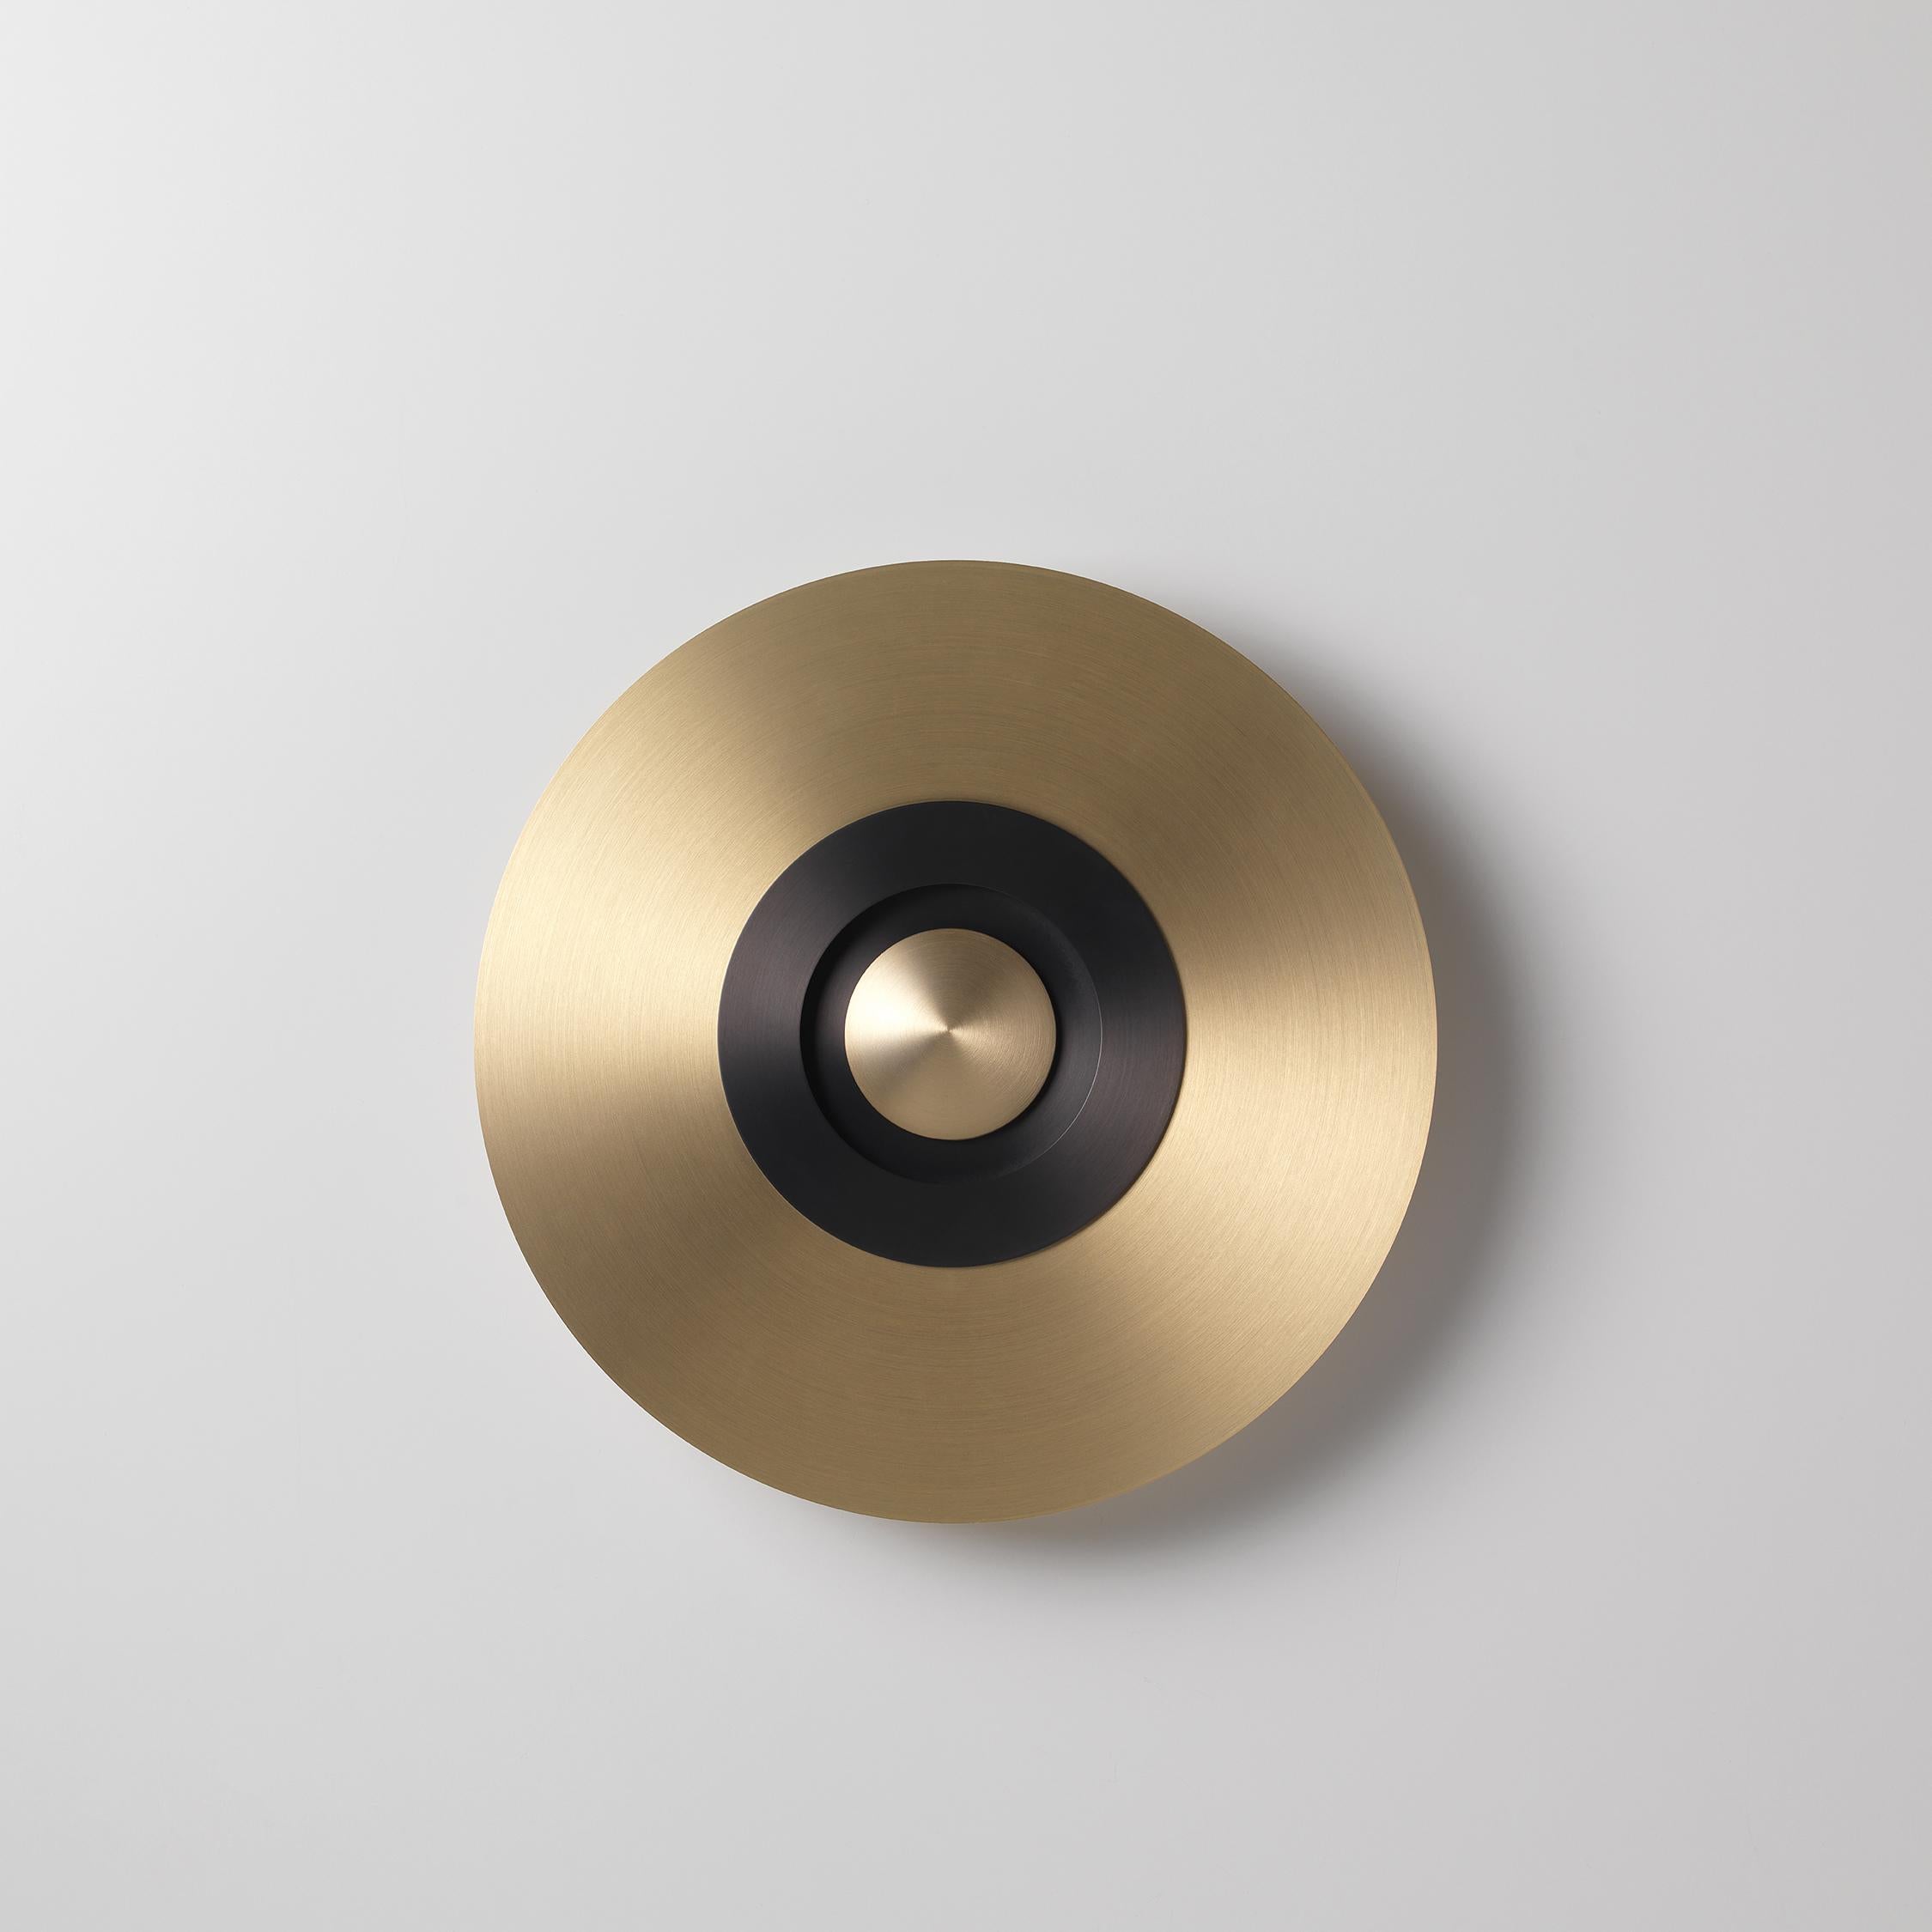 Earth Radian wall light by Emilie Cathelineau
Dimensions: D33 X H5 cm
Materials: Solid brass,Polycarbonate diffuser.
Others finishes and dimensions are available.

All our lamps can be wired according to each country. If sold to the USA it will